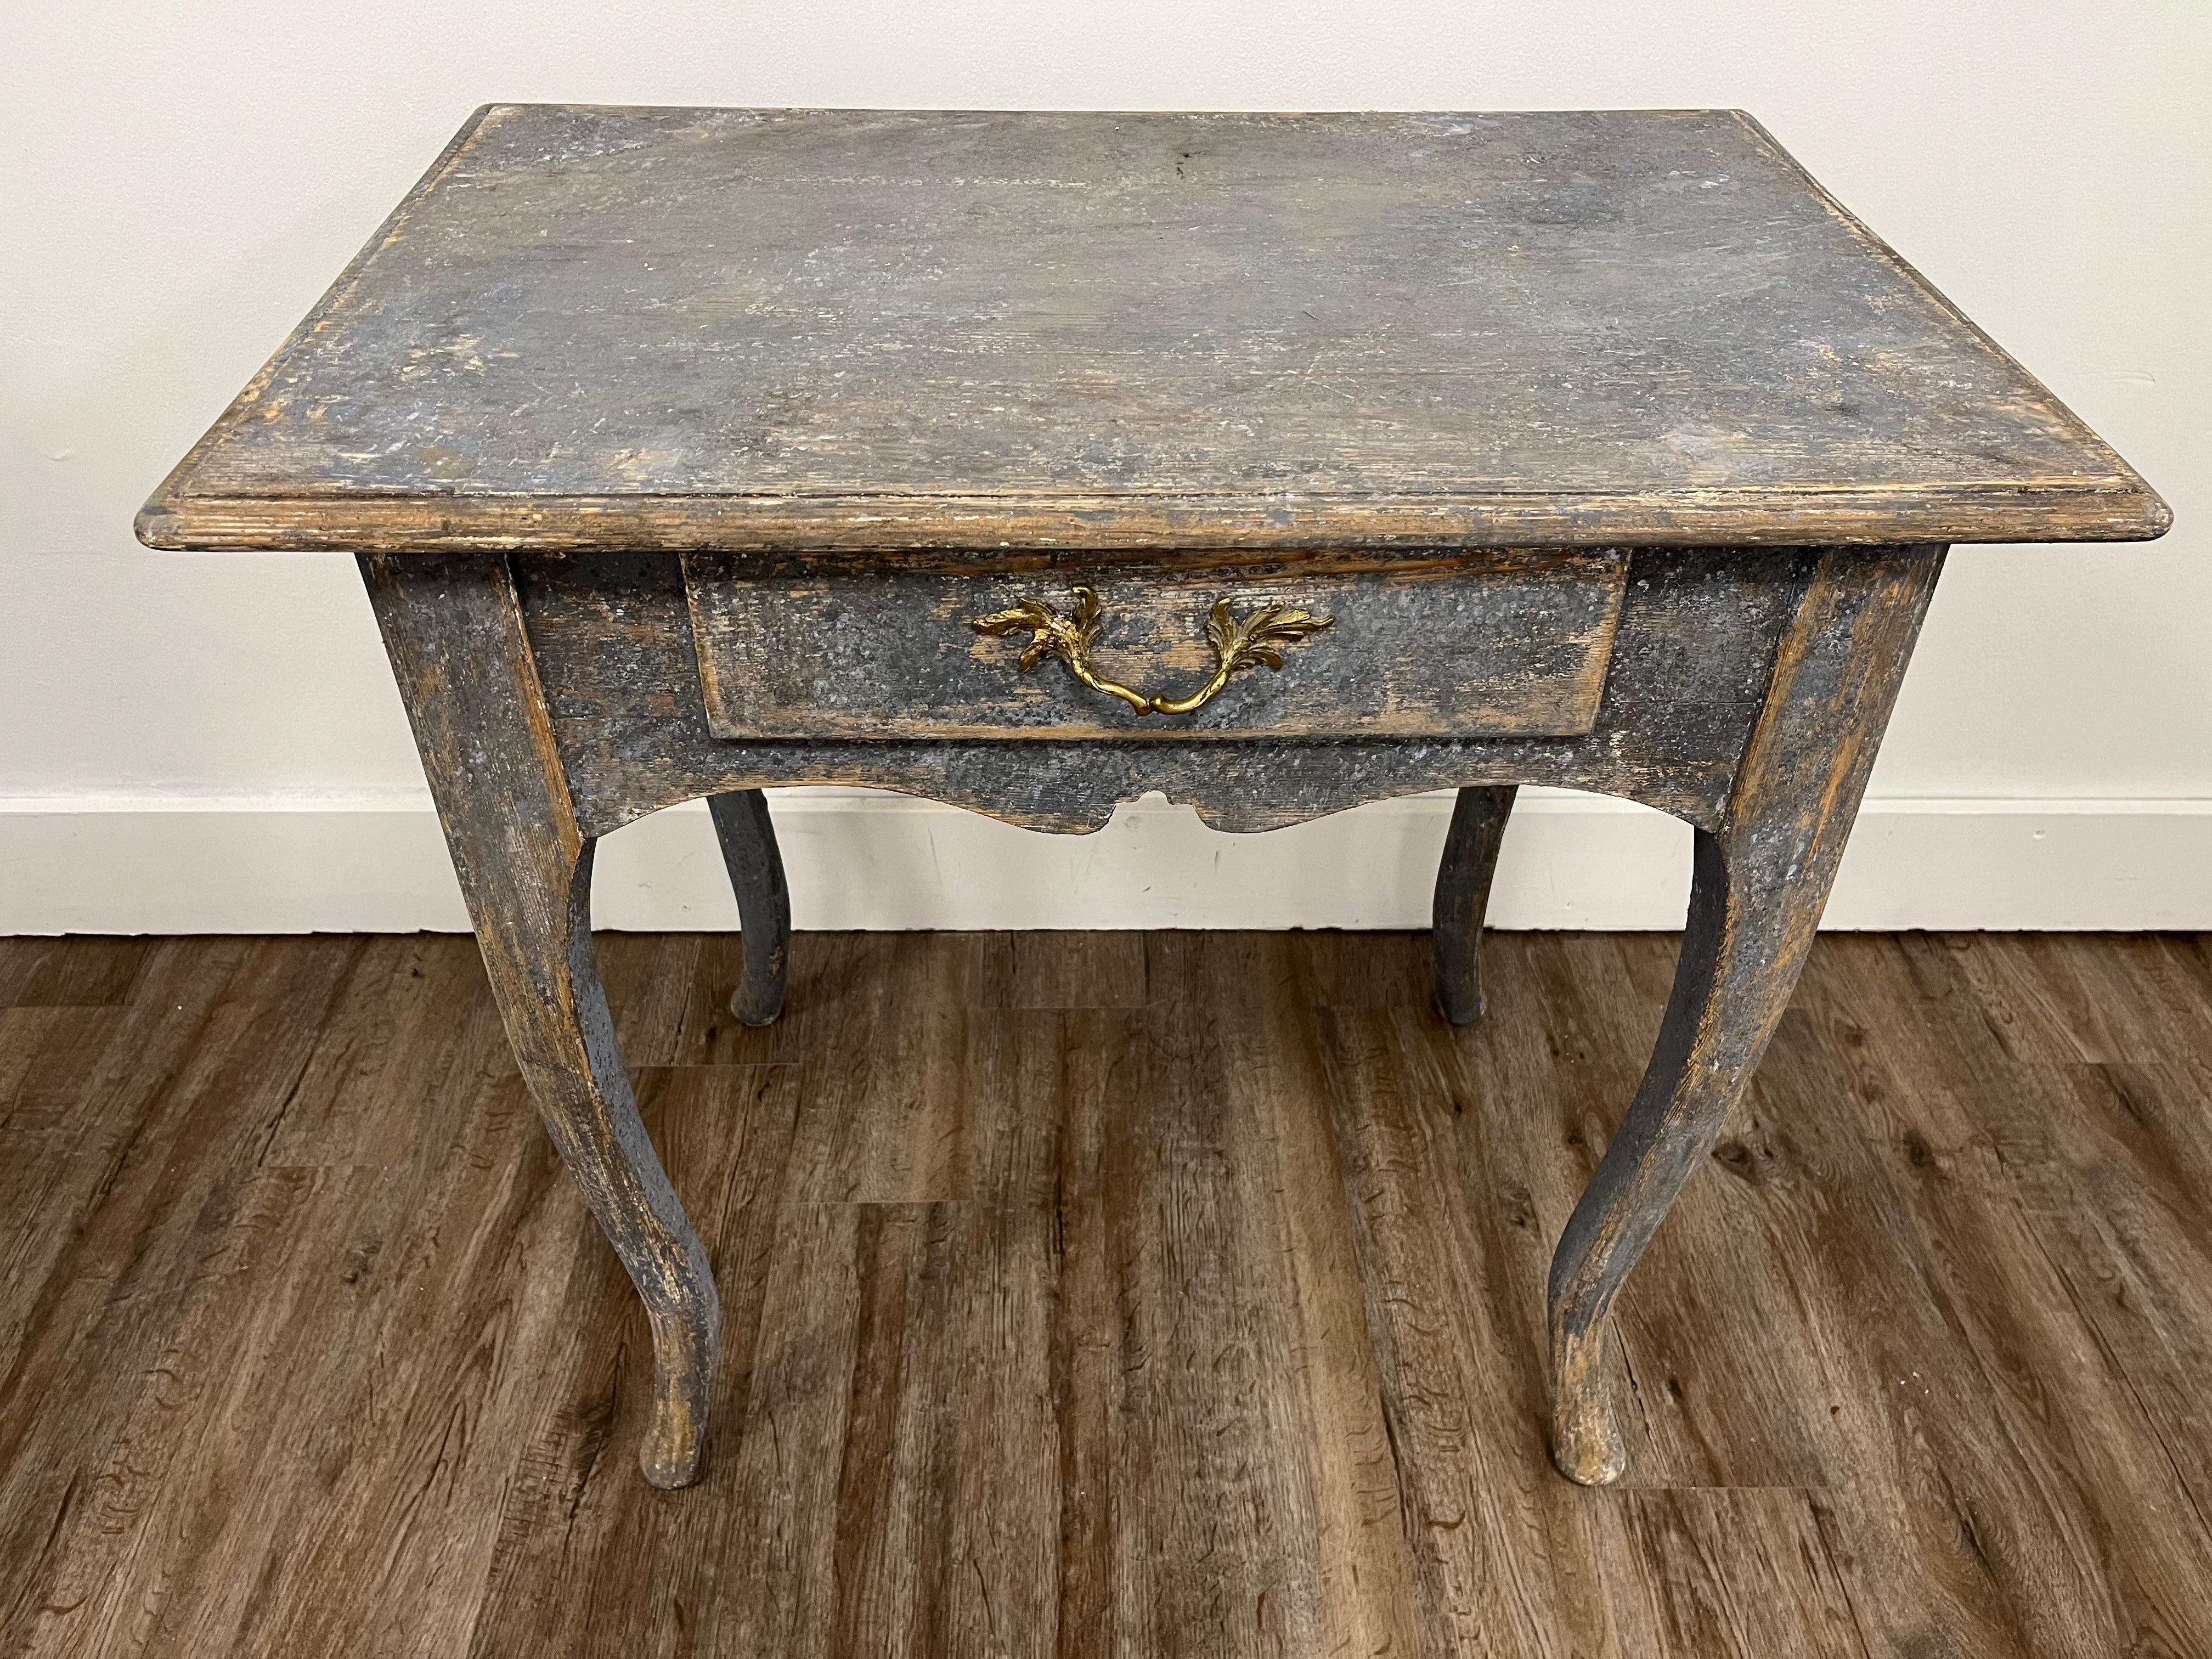 A provincial Swedish Rococo style console table with single drawer. Brass hardware is period but not original to this piece. Wide contoured top sits on a notched skirt and cabriolet legs. Repainted in blue with a patina effect..